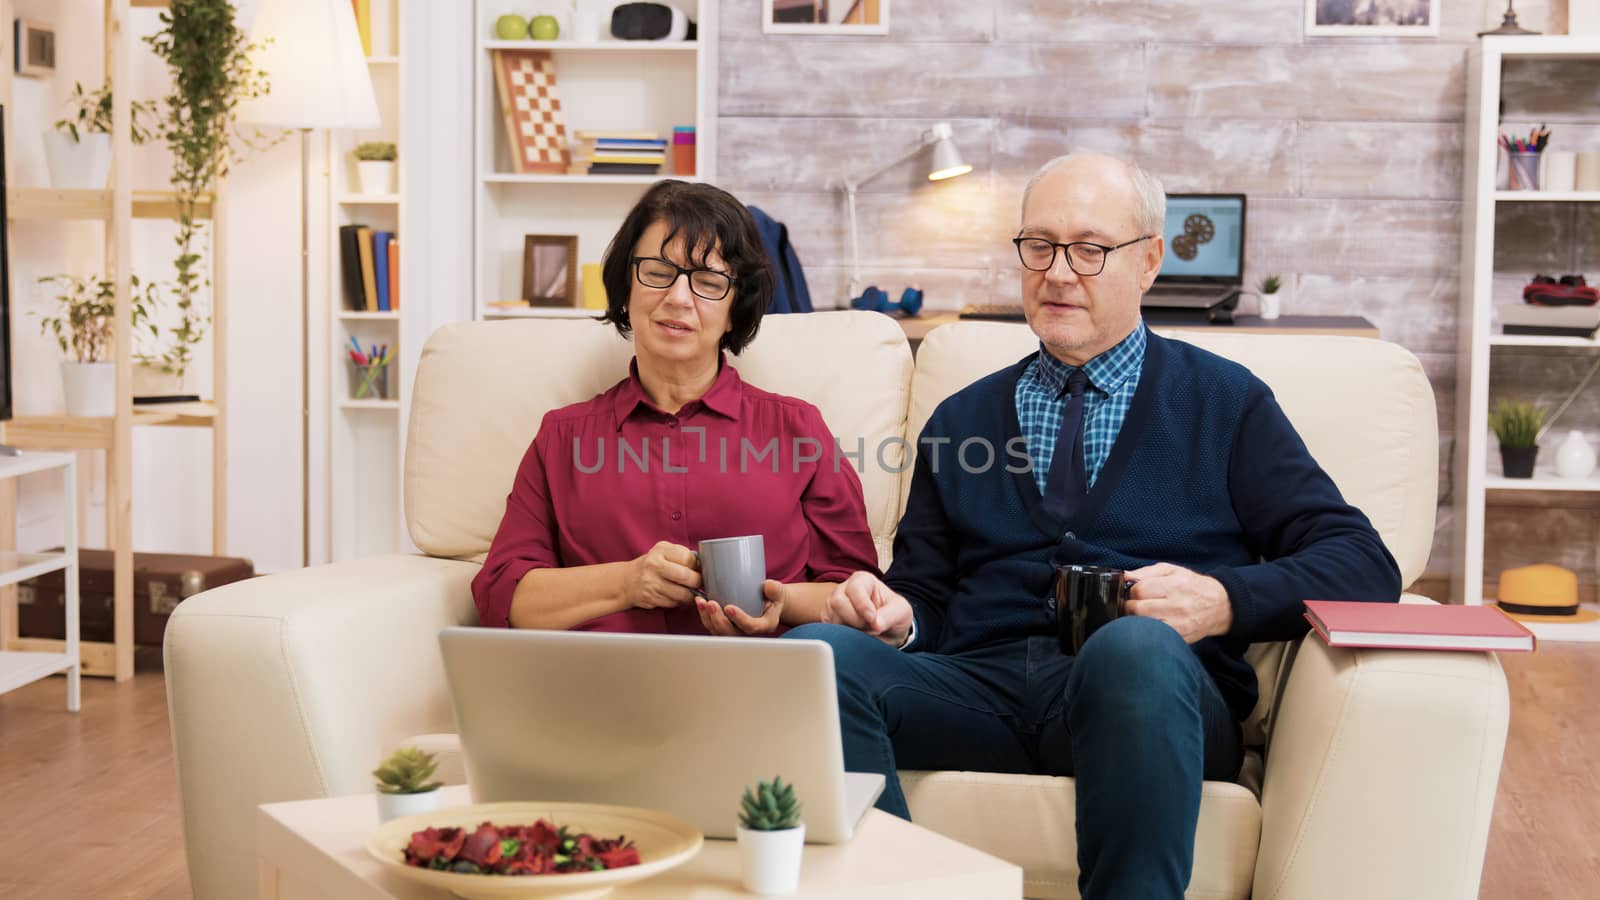 Couple of old people using modern technology by DCStudio